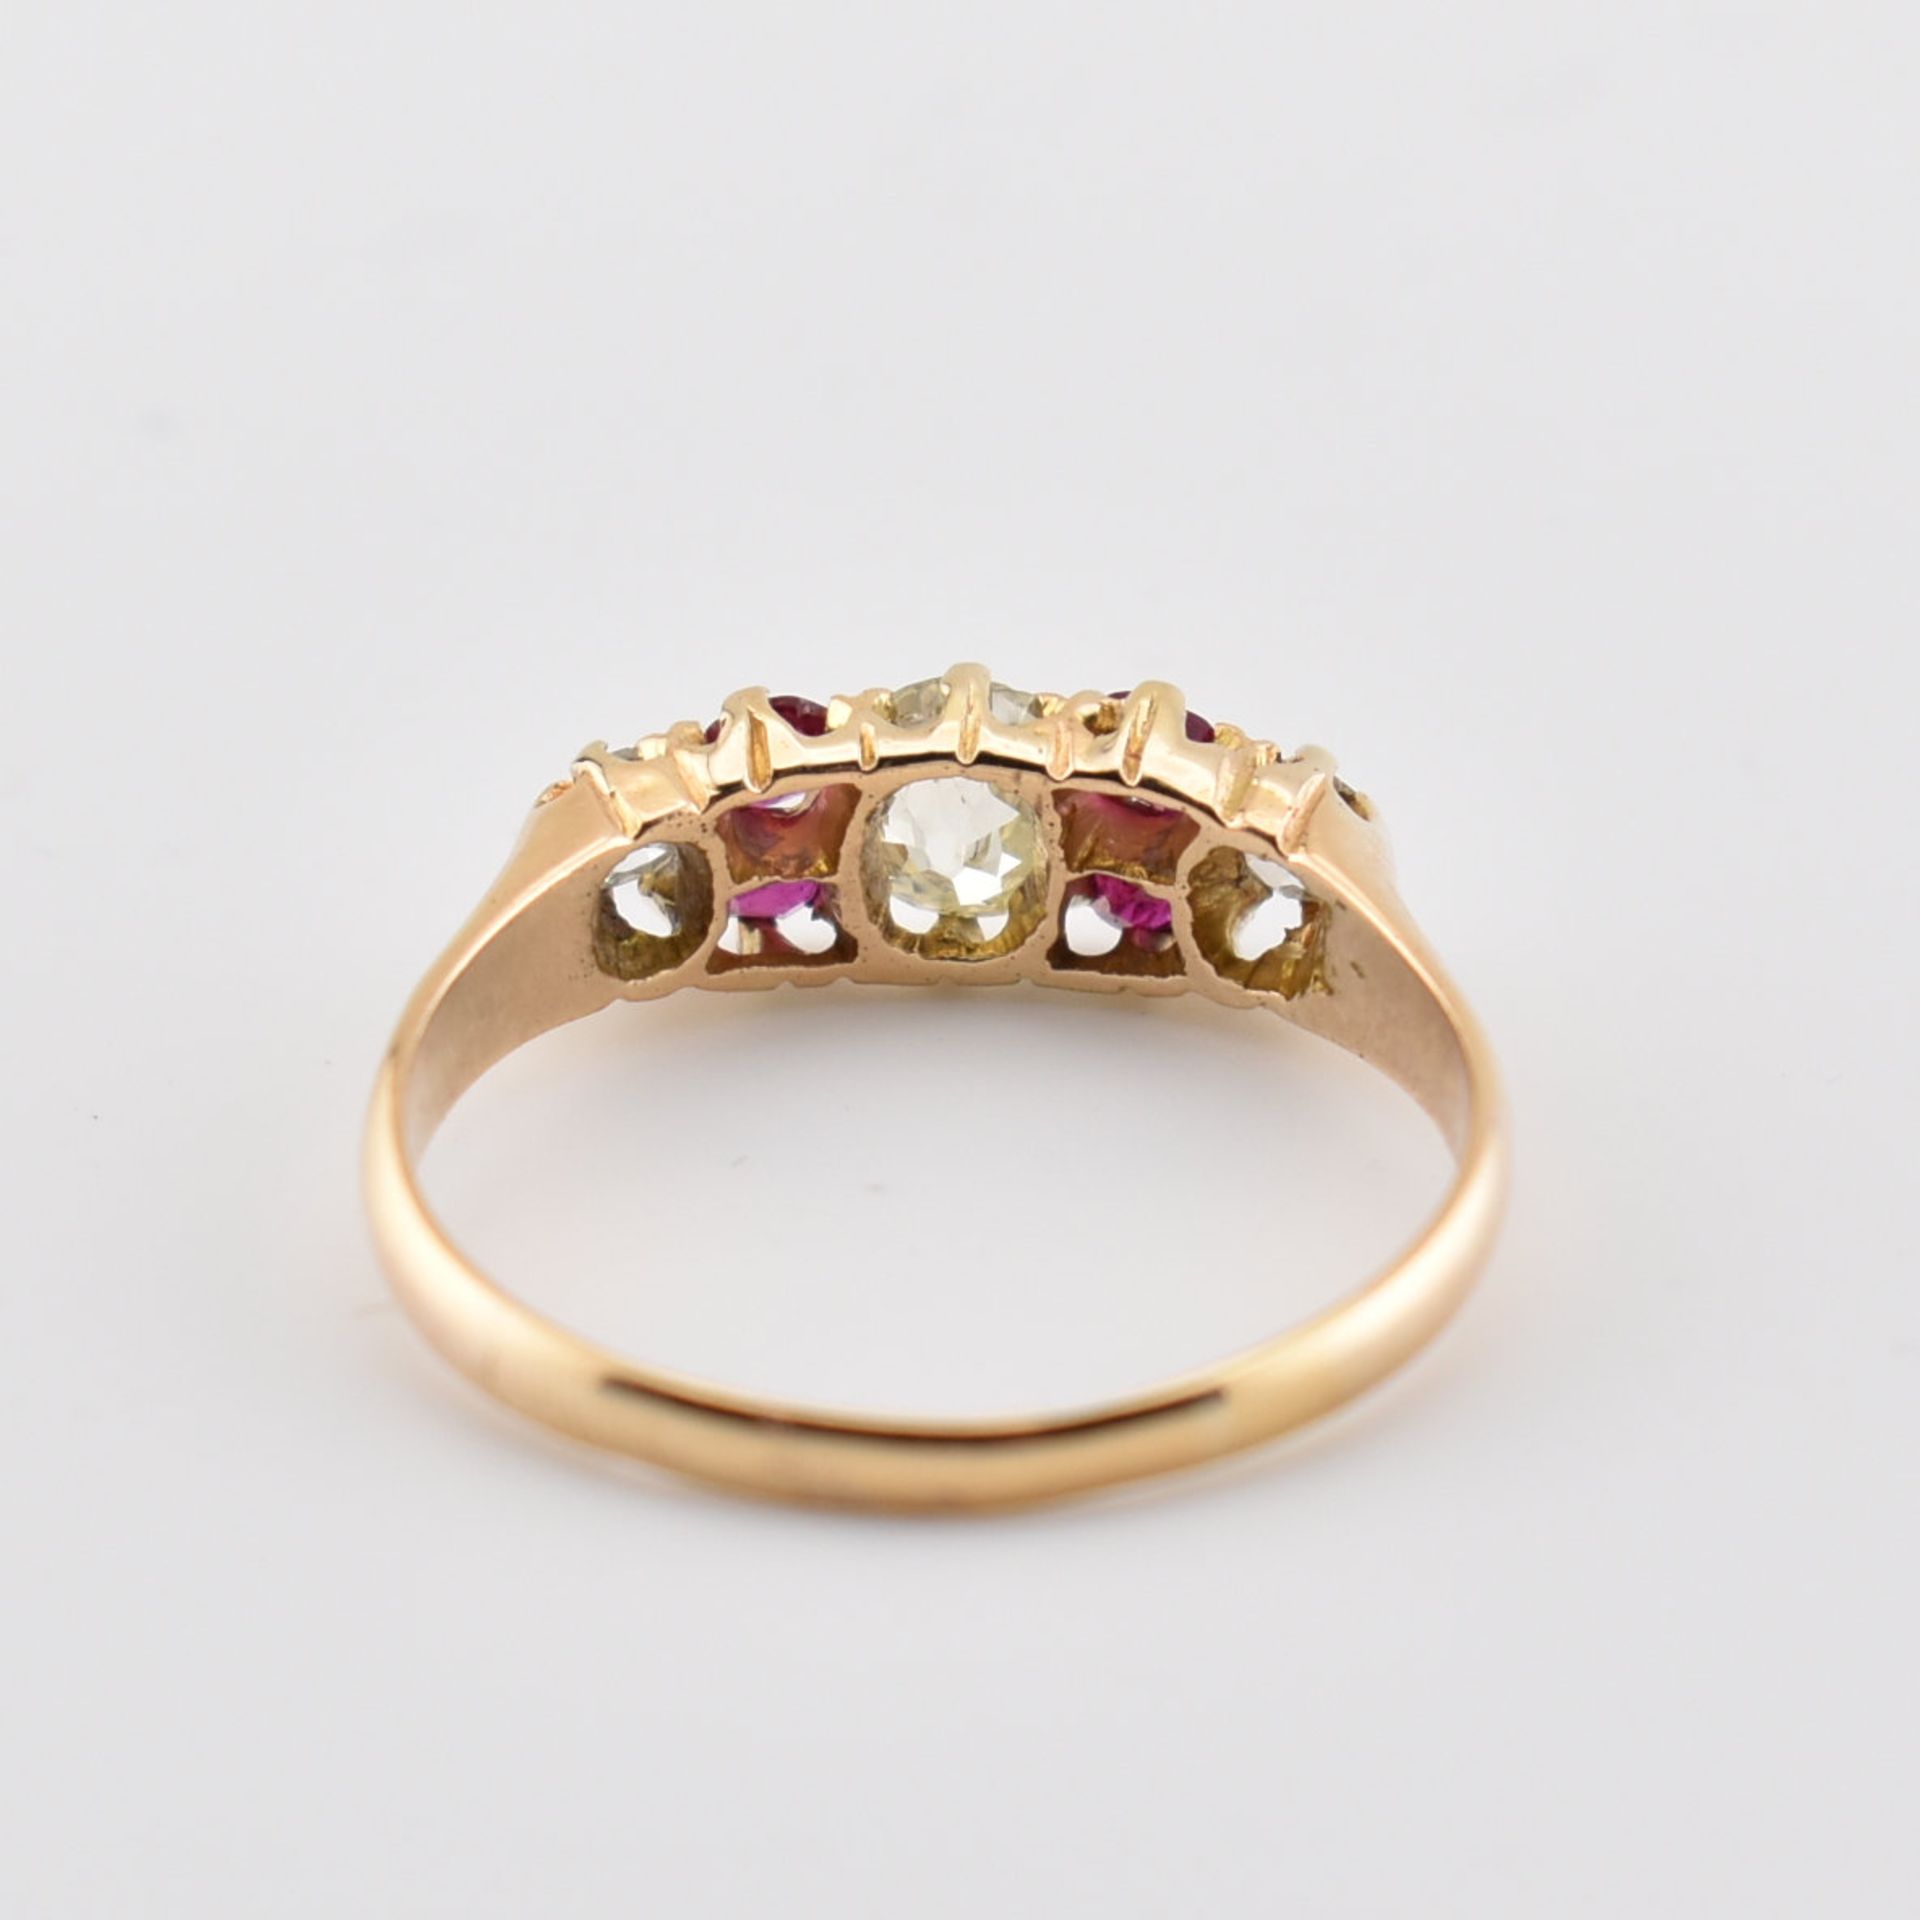 VICTORIAN HALLMARKED 18CT GOLD DIAMOND & RED STONE RING - Image 5 of 7